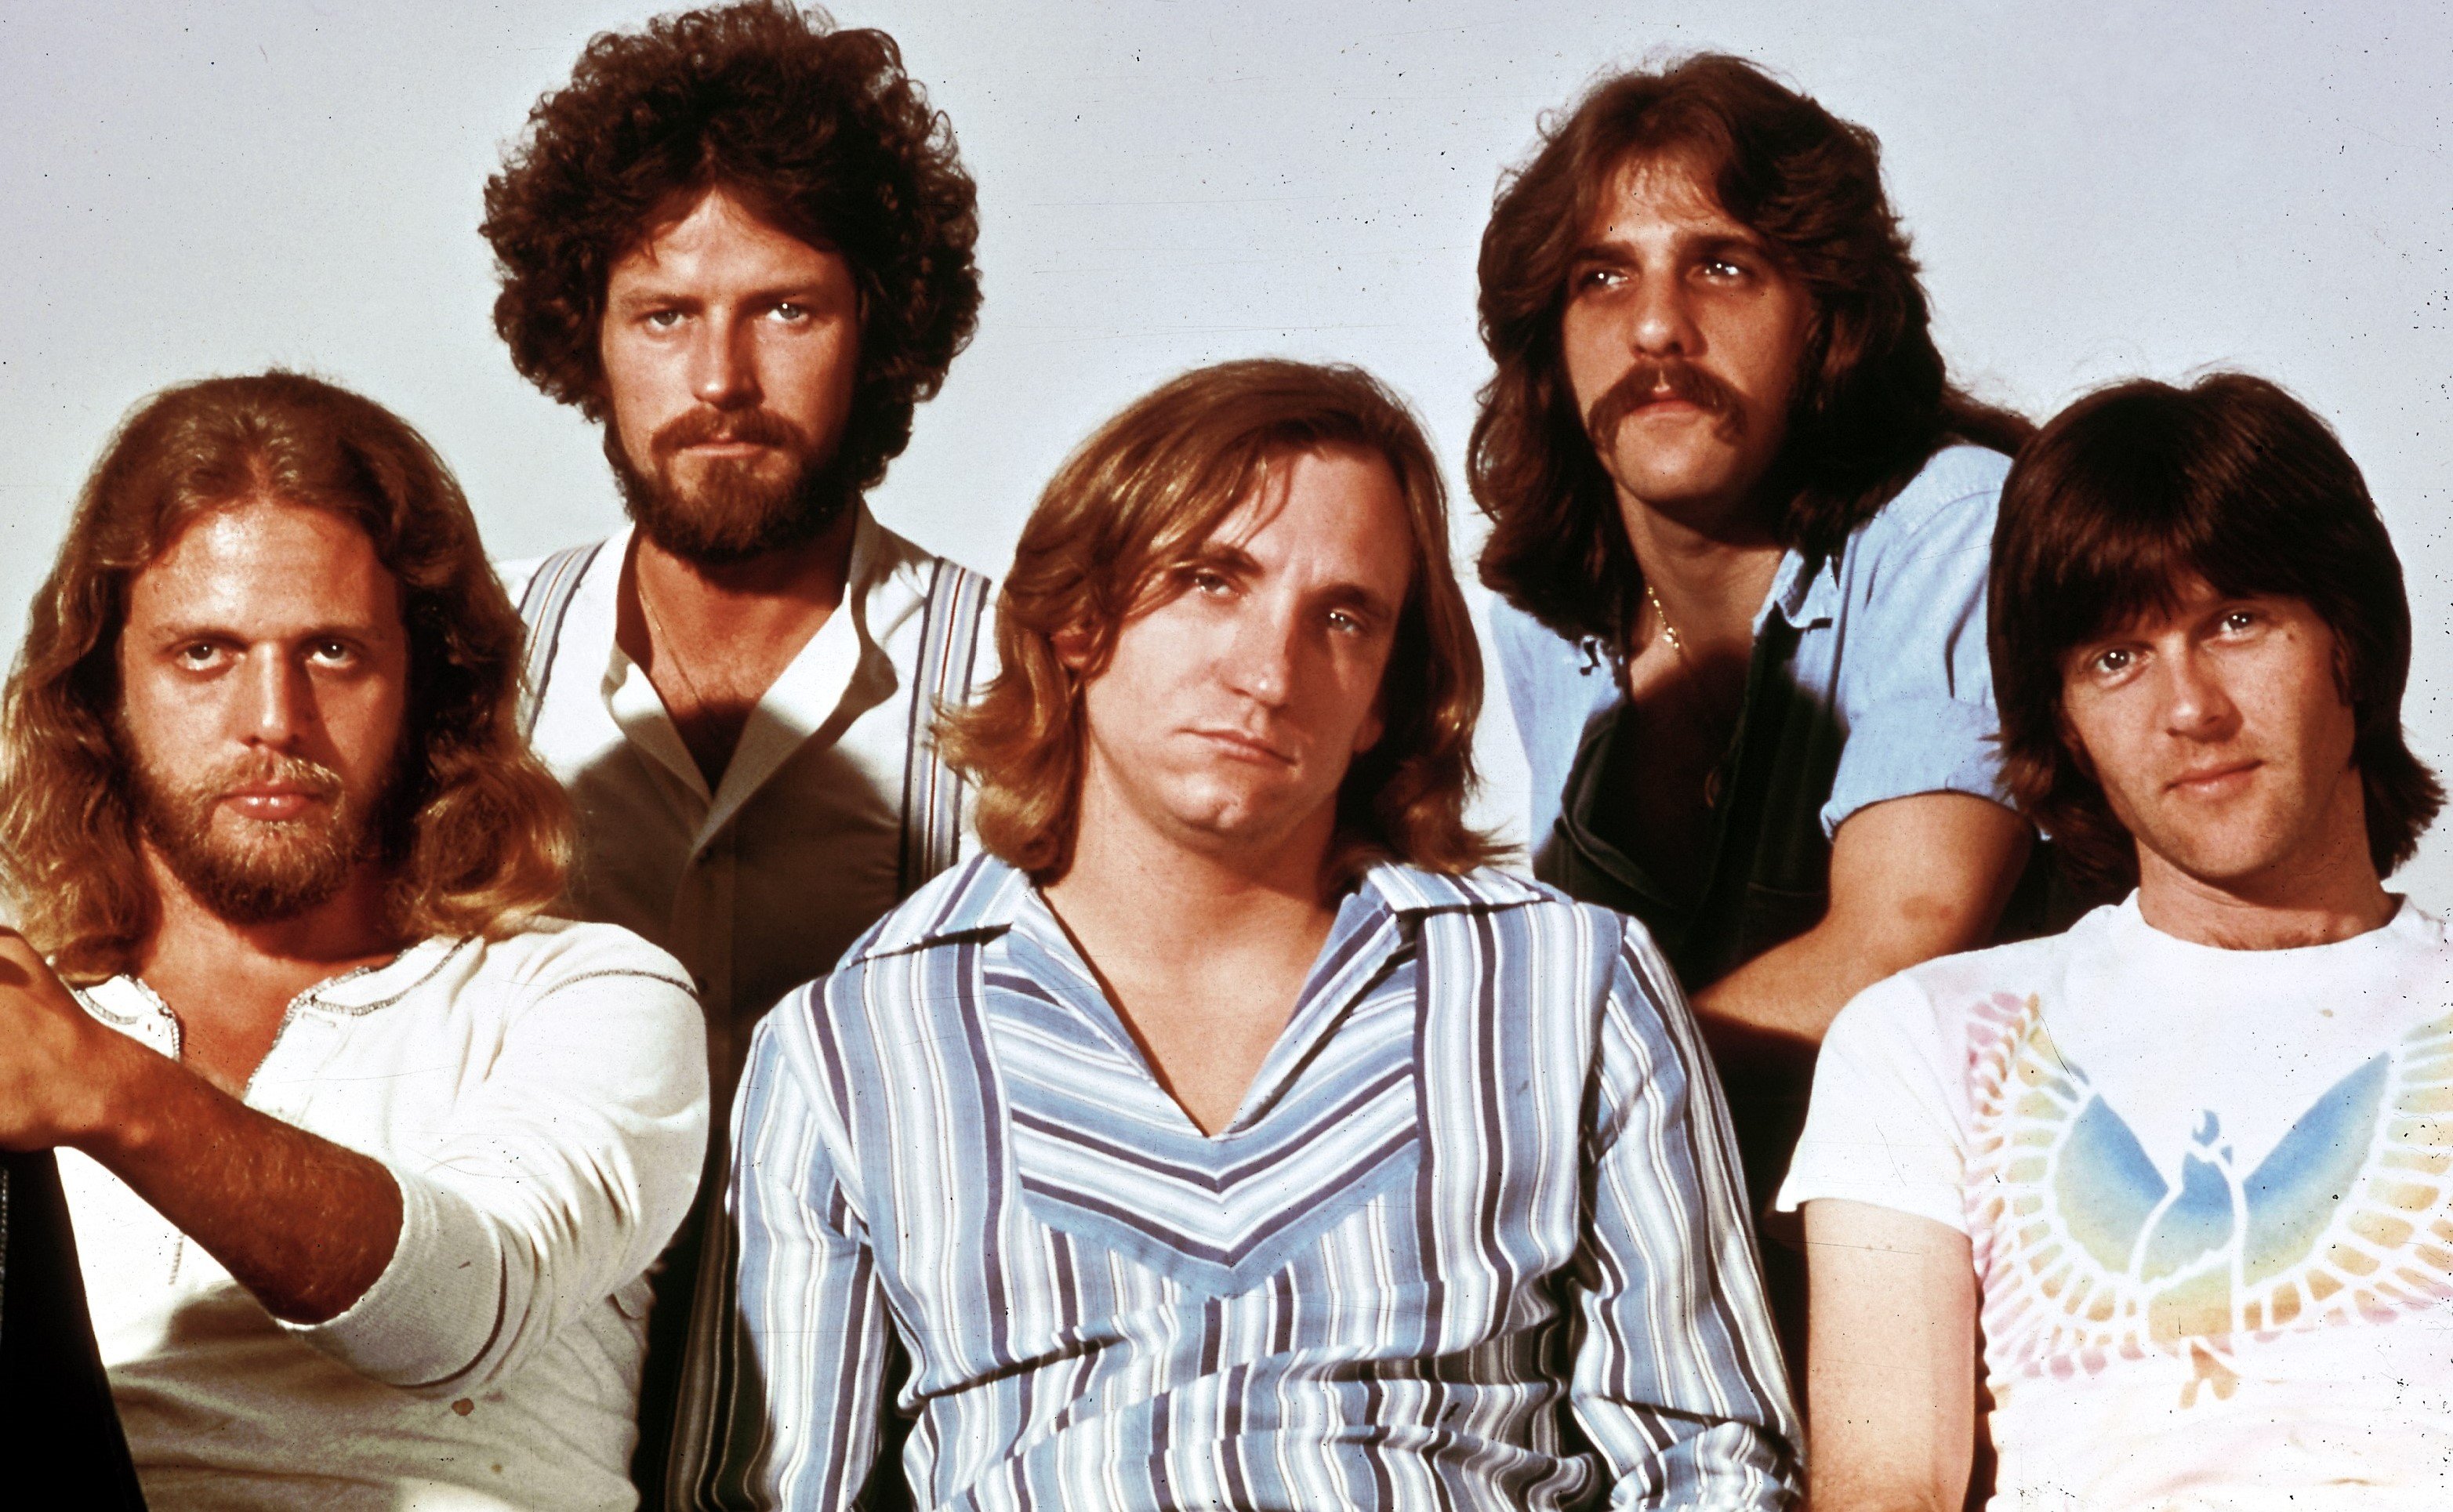 Why The Eagles’ ‘Witchy Woman’ Appealed to the Masses, According to Don Henley